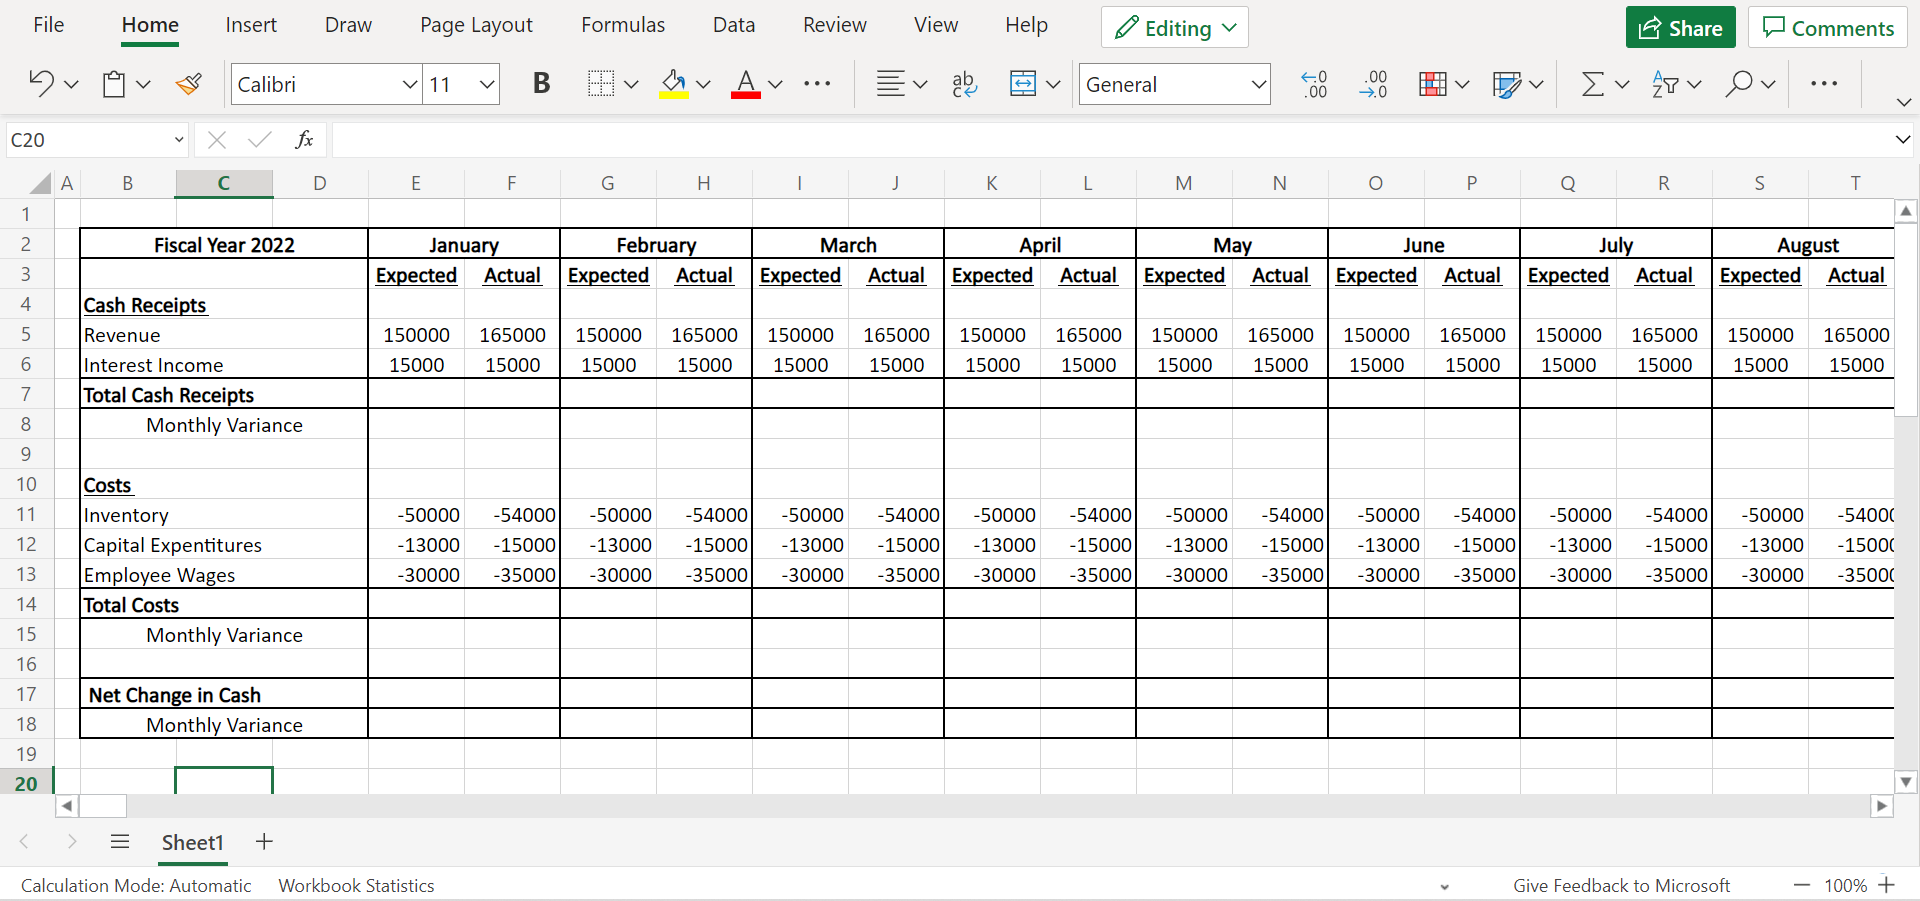 Inputting the expected and actual values